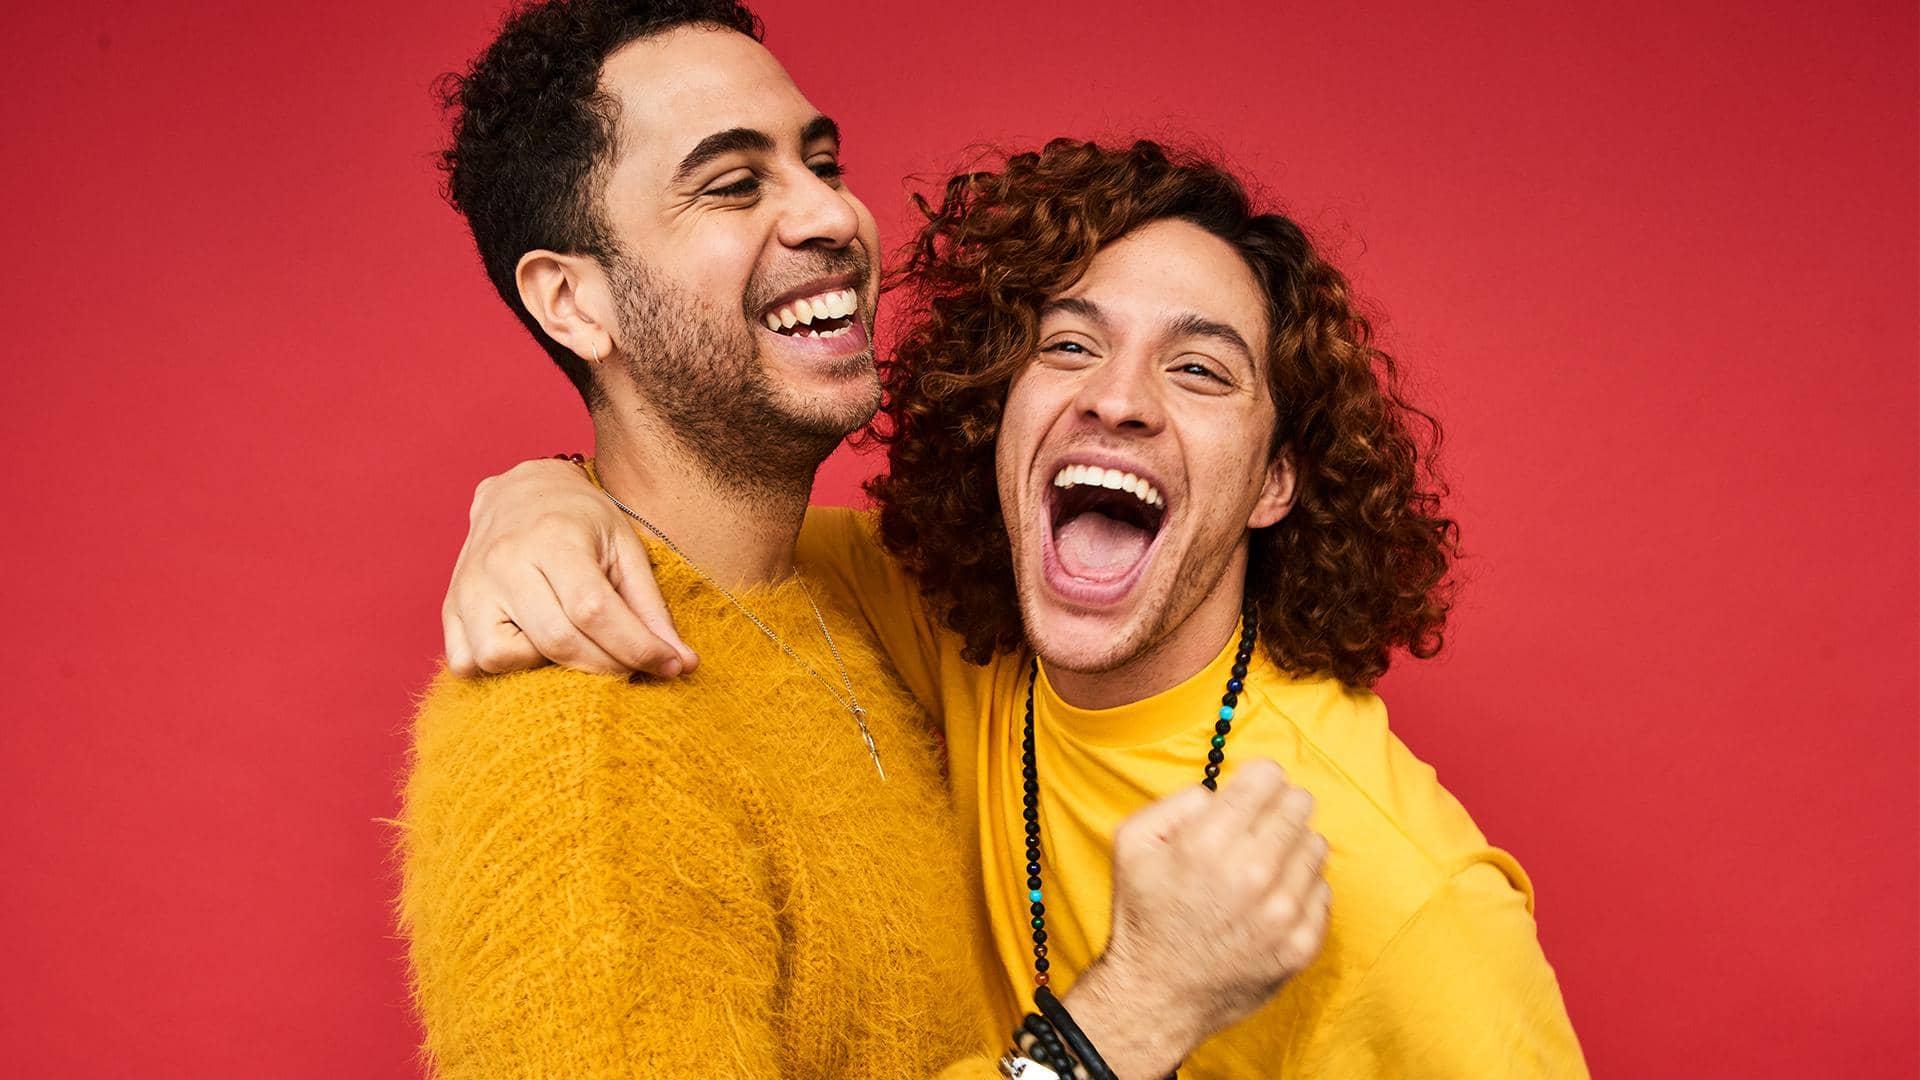 Male couple against a red background